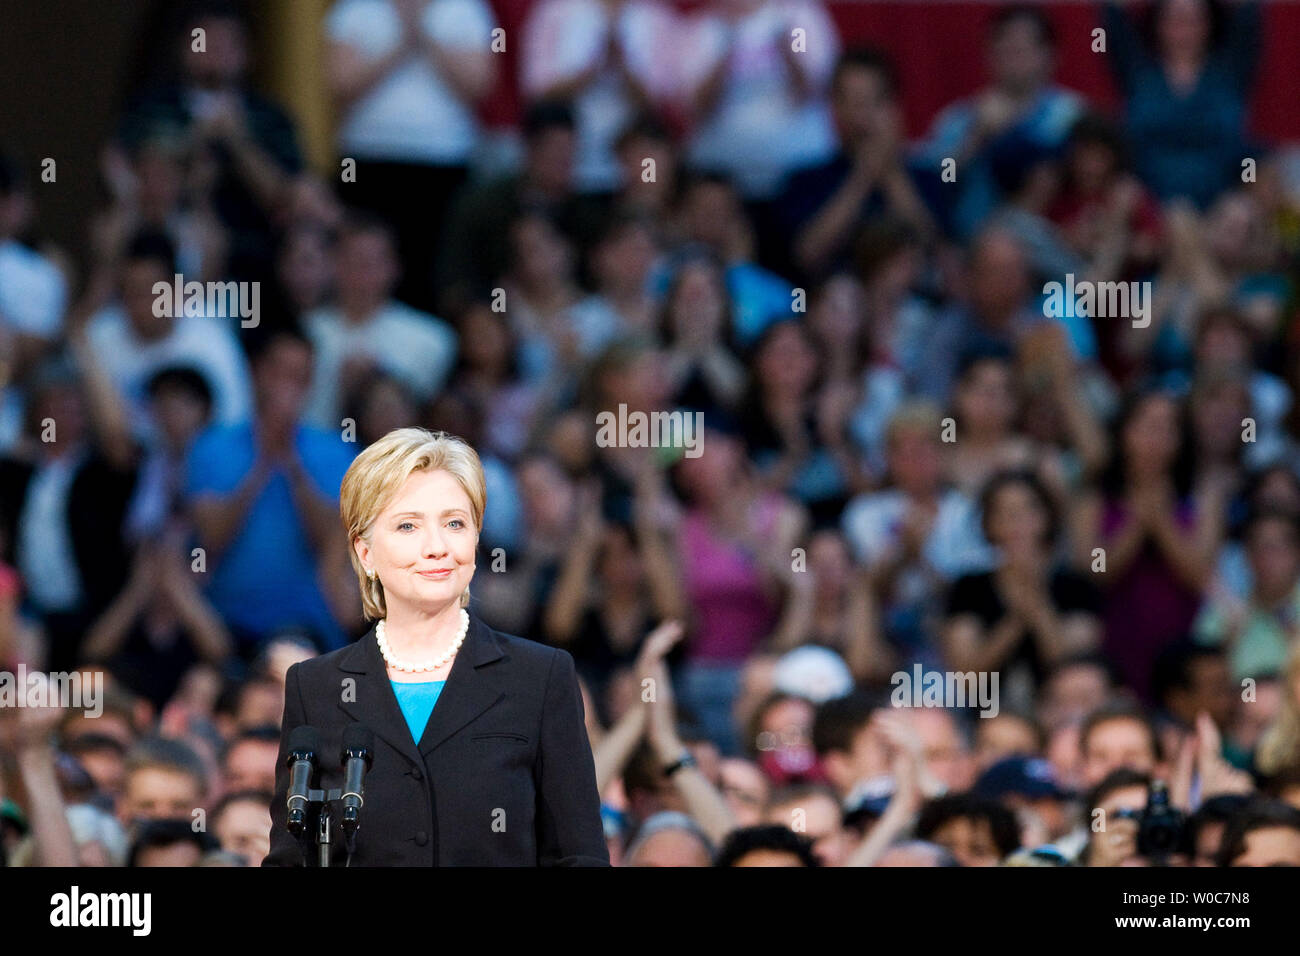 Sen. Hillary Rodham Clinton, D-NY, speaks to supporters at a campaign event at the National Building Museum in Washington on June 7, 2008. Clinton formally suspended her campaign for president and endorsed Democratic Presidential candidate Sen. Barack Obama, D-IL. (UPI Photo/Patrick D. McDermott) Stock Photo